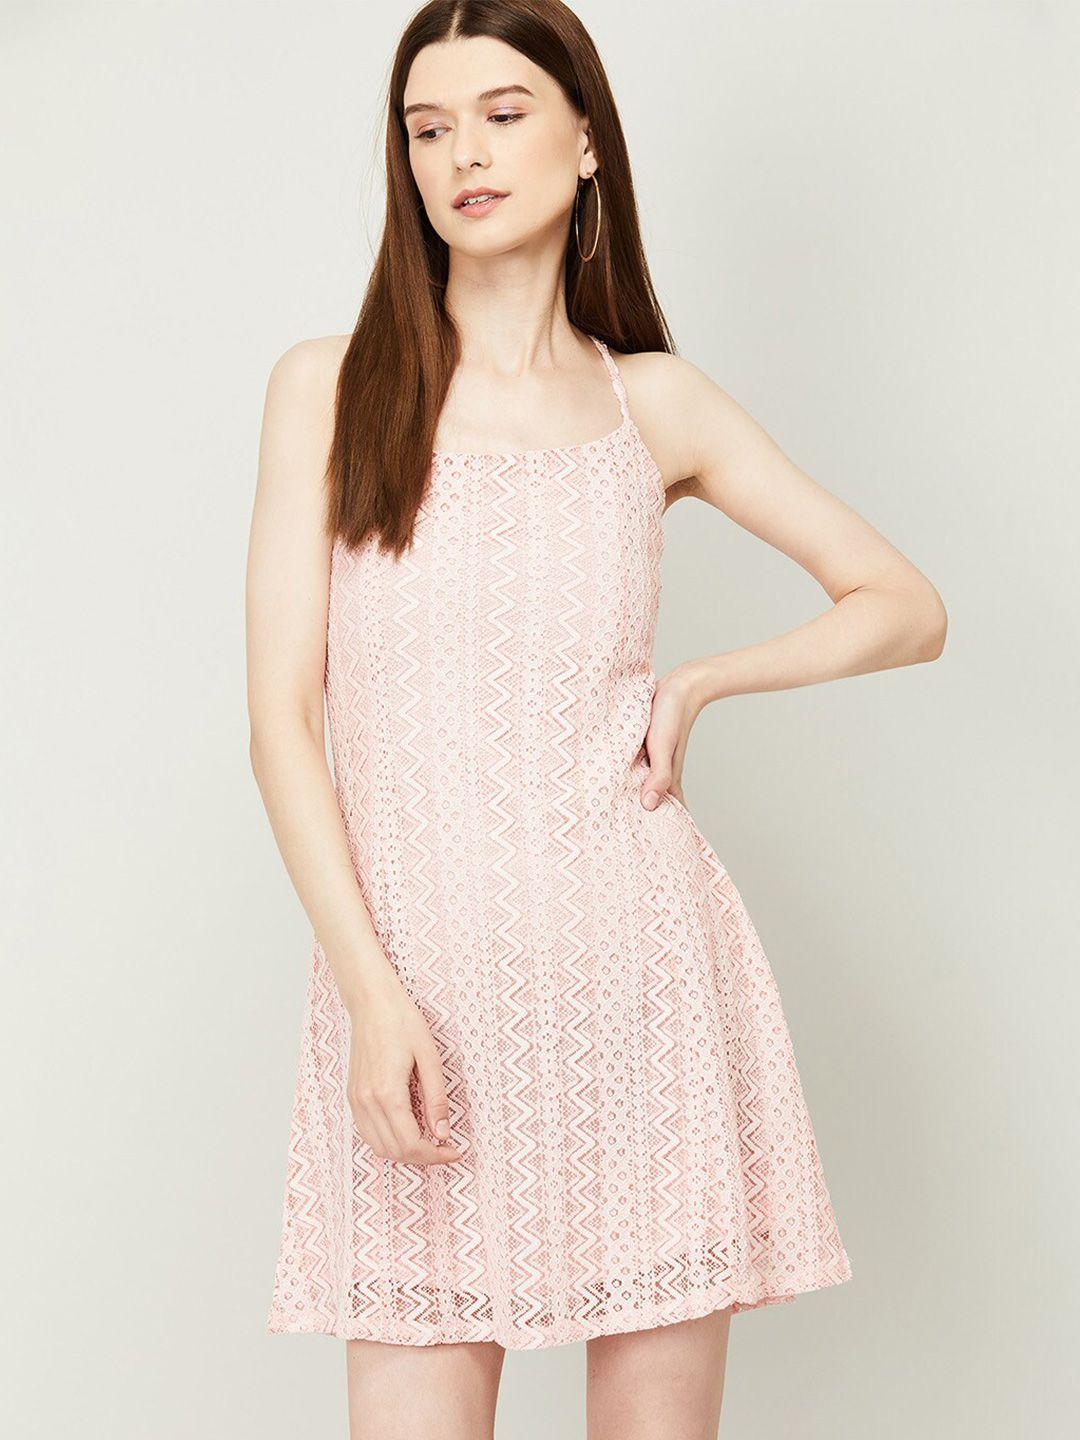 ginger-by-lifestyle-pink-a-line-dress